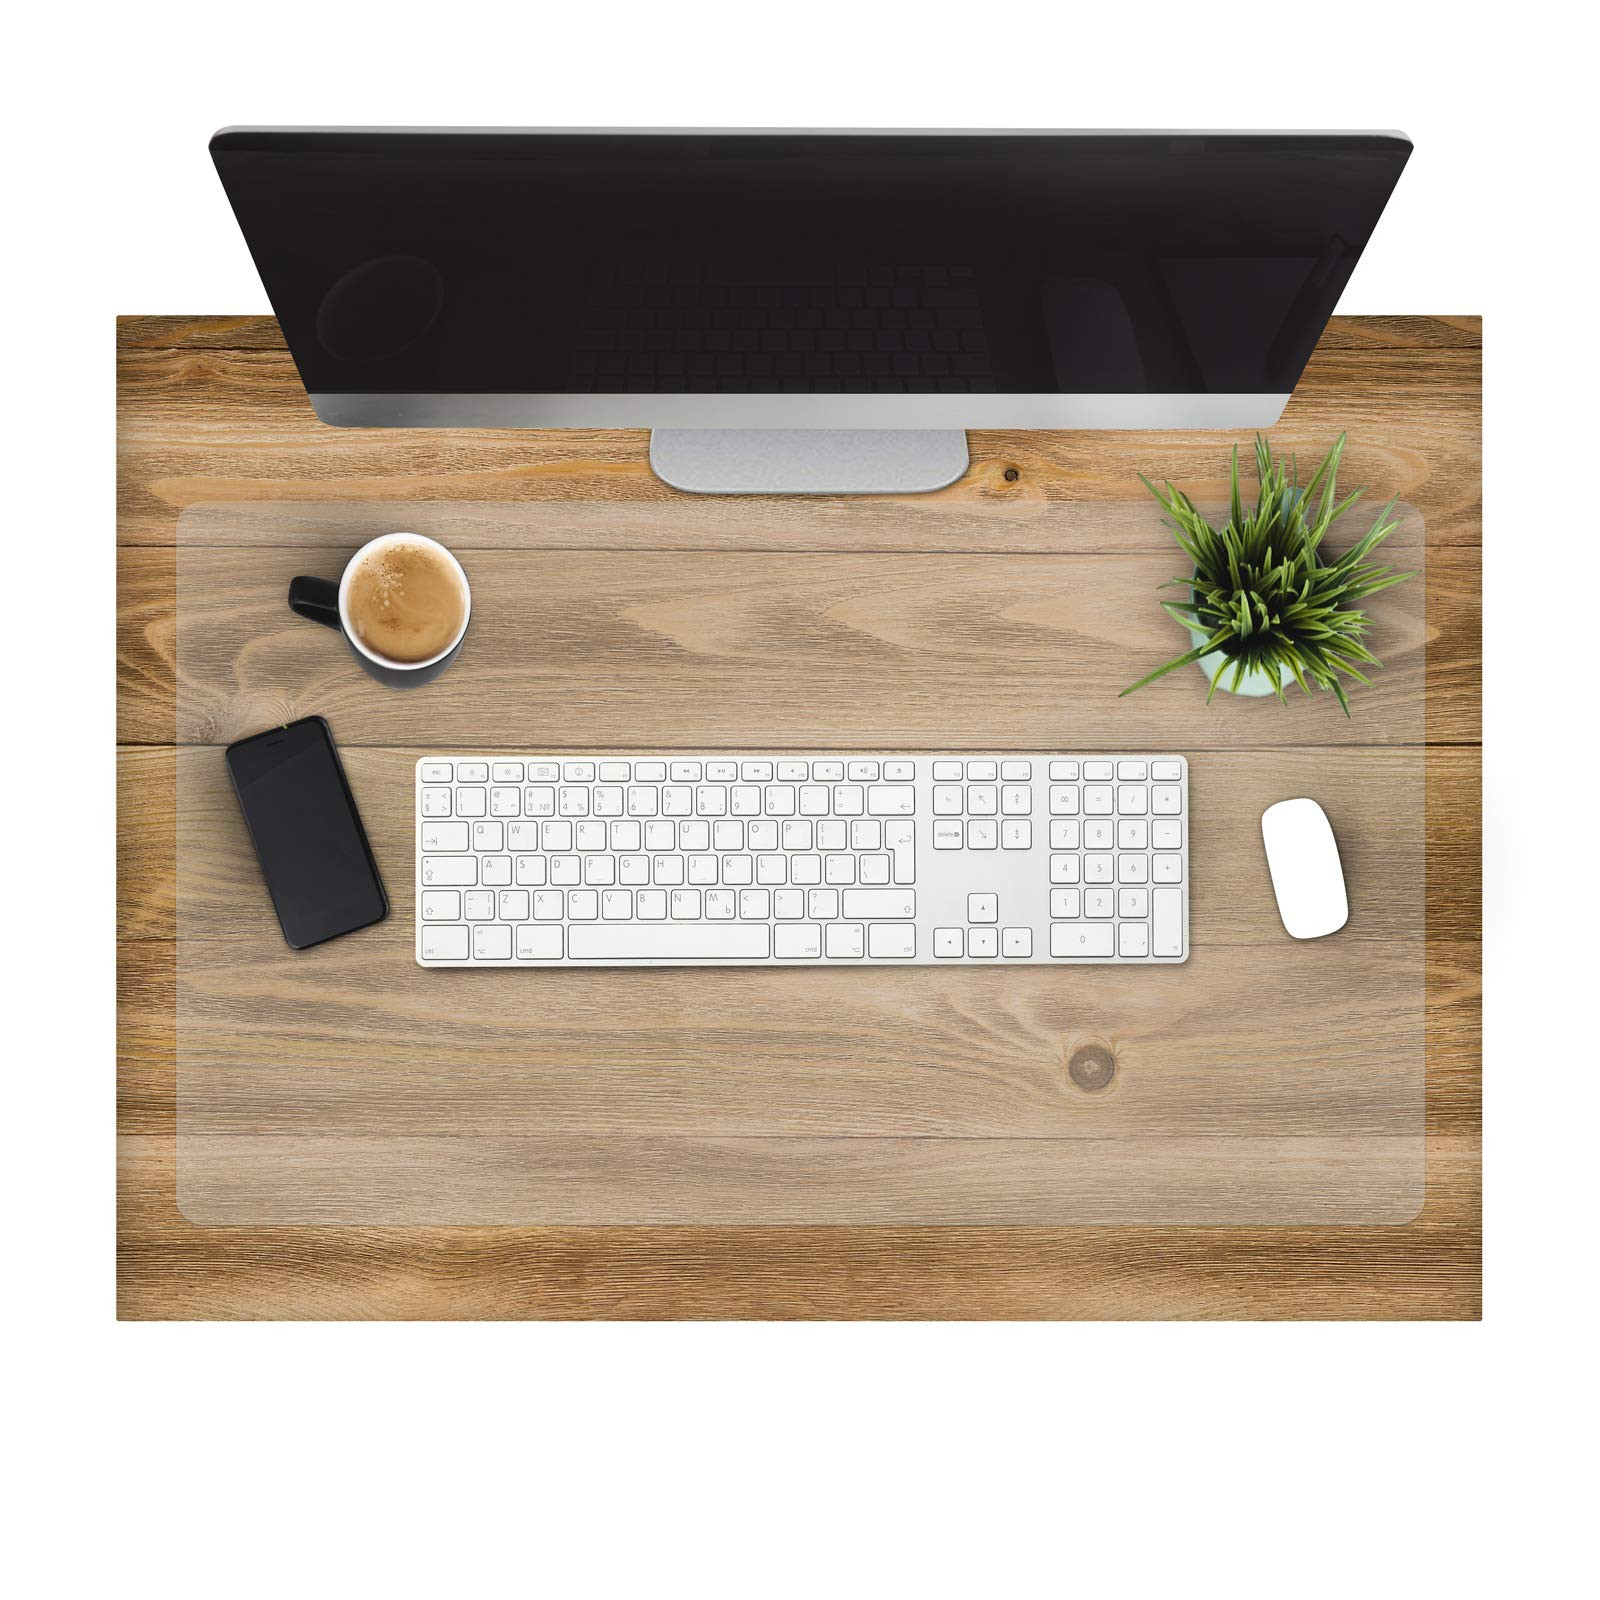 Kuber Industries Tranasparent Desk Protector,Office Desk Mat, Mouse Pad, Laptop Desk Pad, Non-Slip, Waterproof Desk Writing Pad for Office and Home, 18